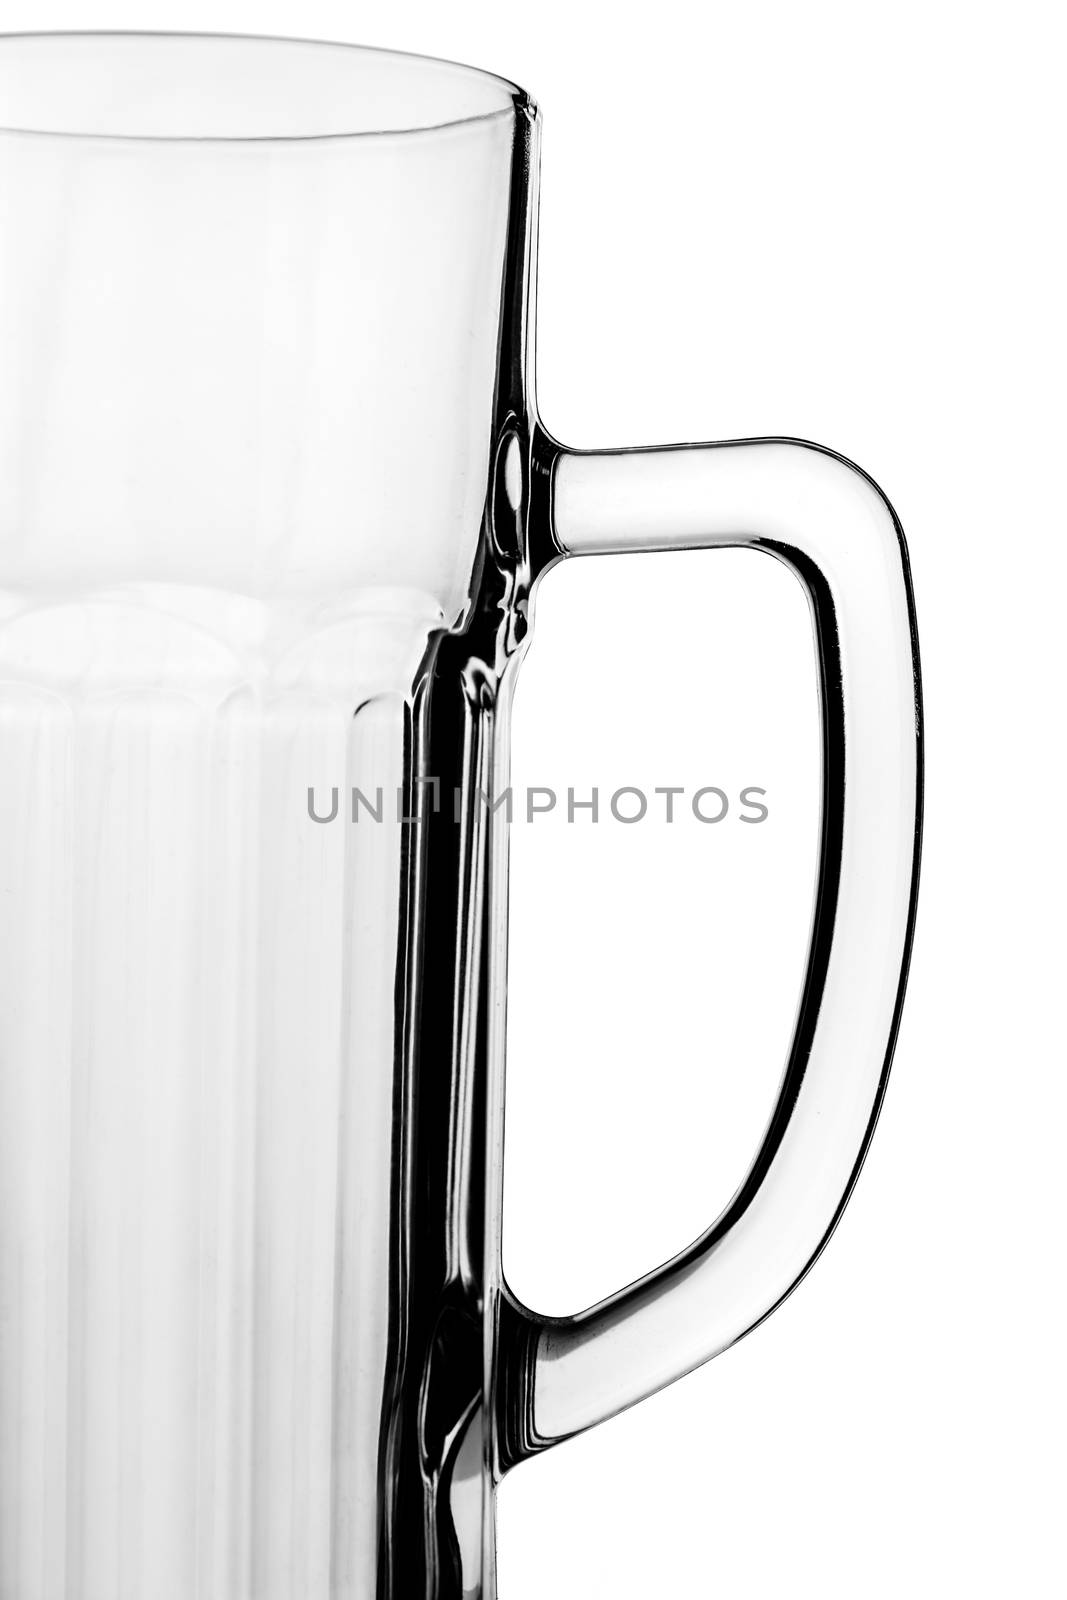 large empty beer glass, isolated on white background